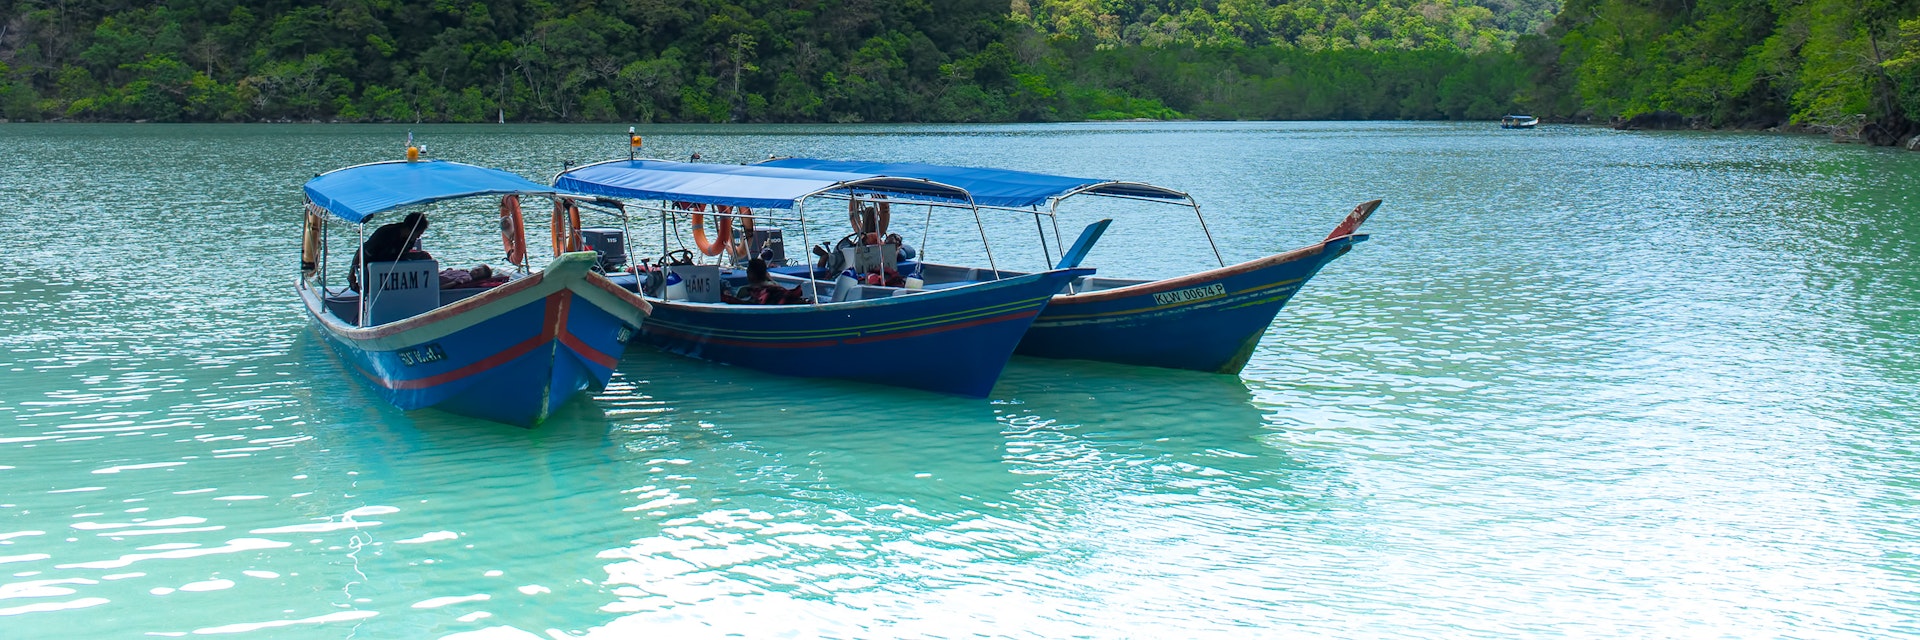 February 25, 2012: Three tourist boats in the water at Pregnant Maiden Island (Pulau Dayang).